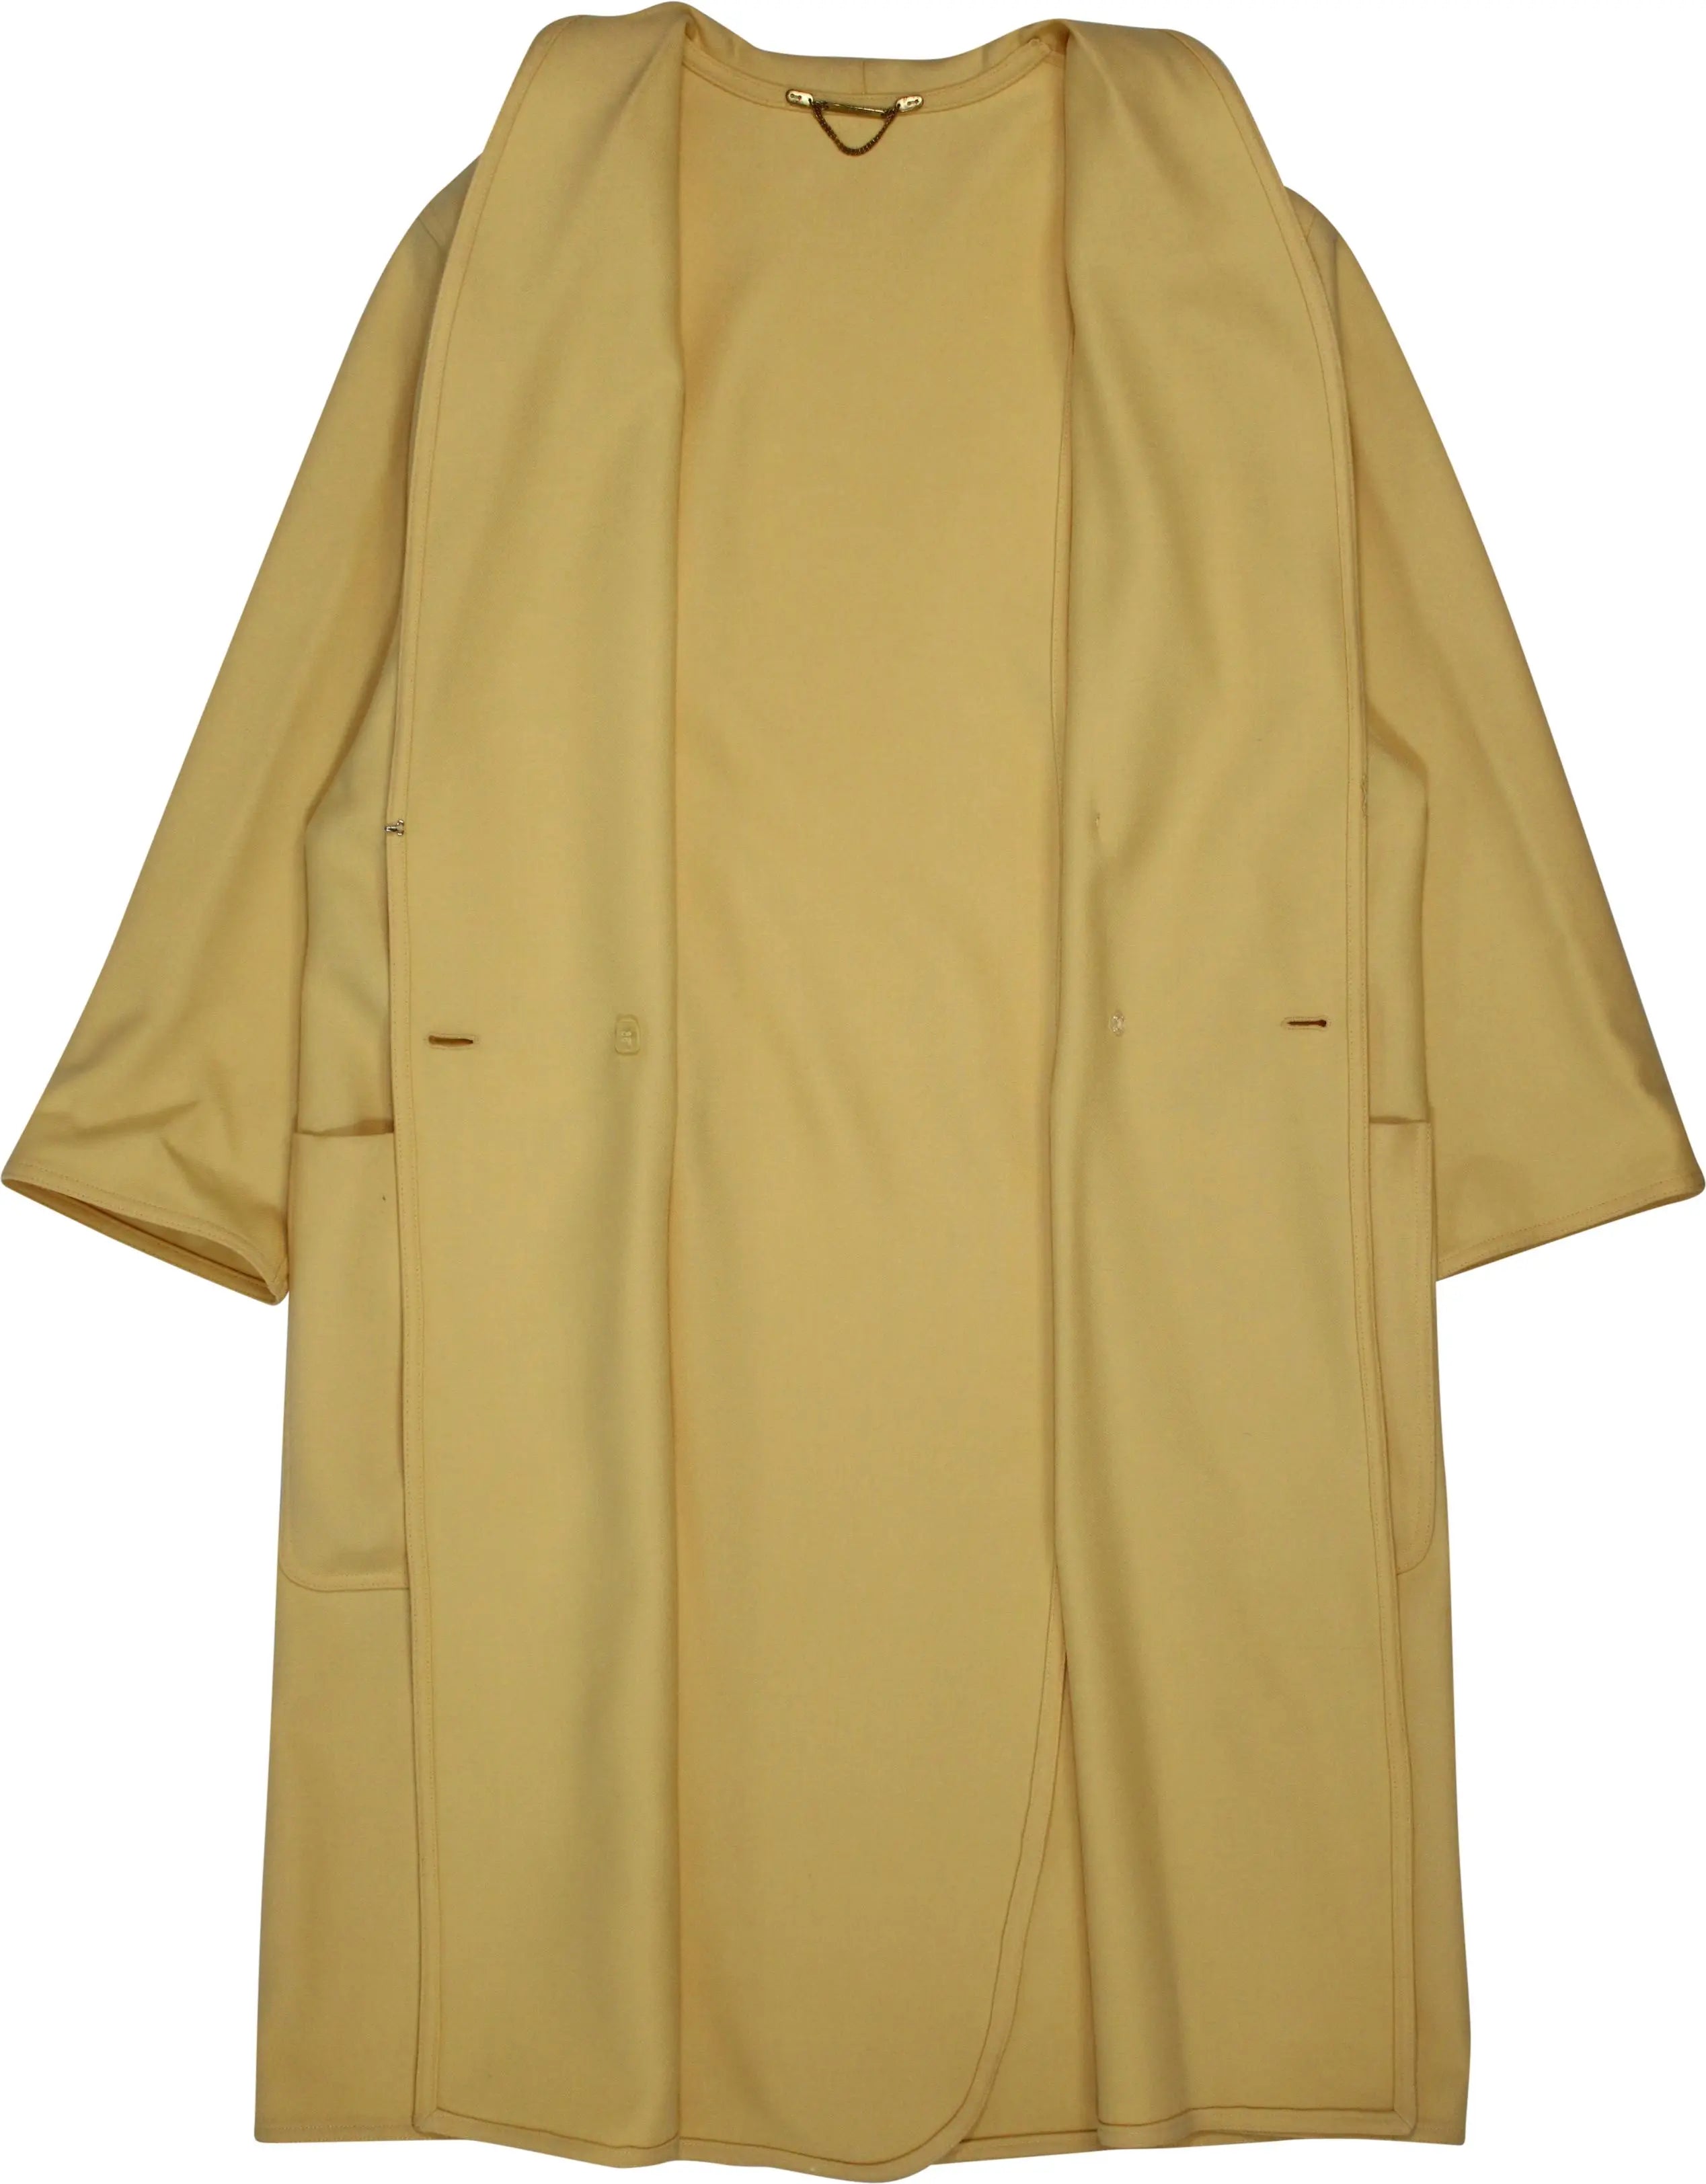 Unknown - 80s/90s Long Oversized Yellow Wool Coat- ThriftTale.com - Vintage and second handclothing